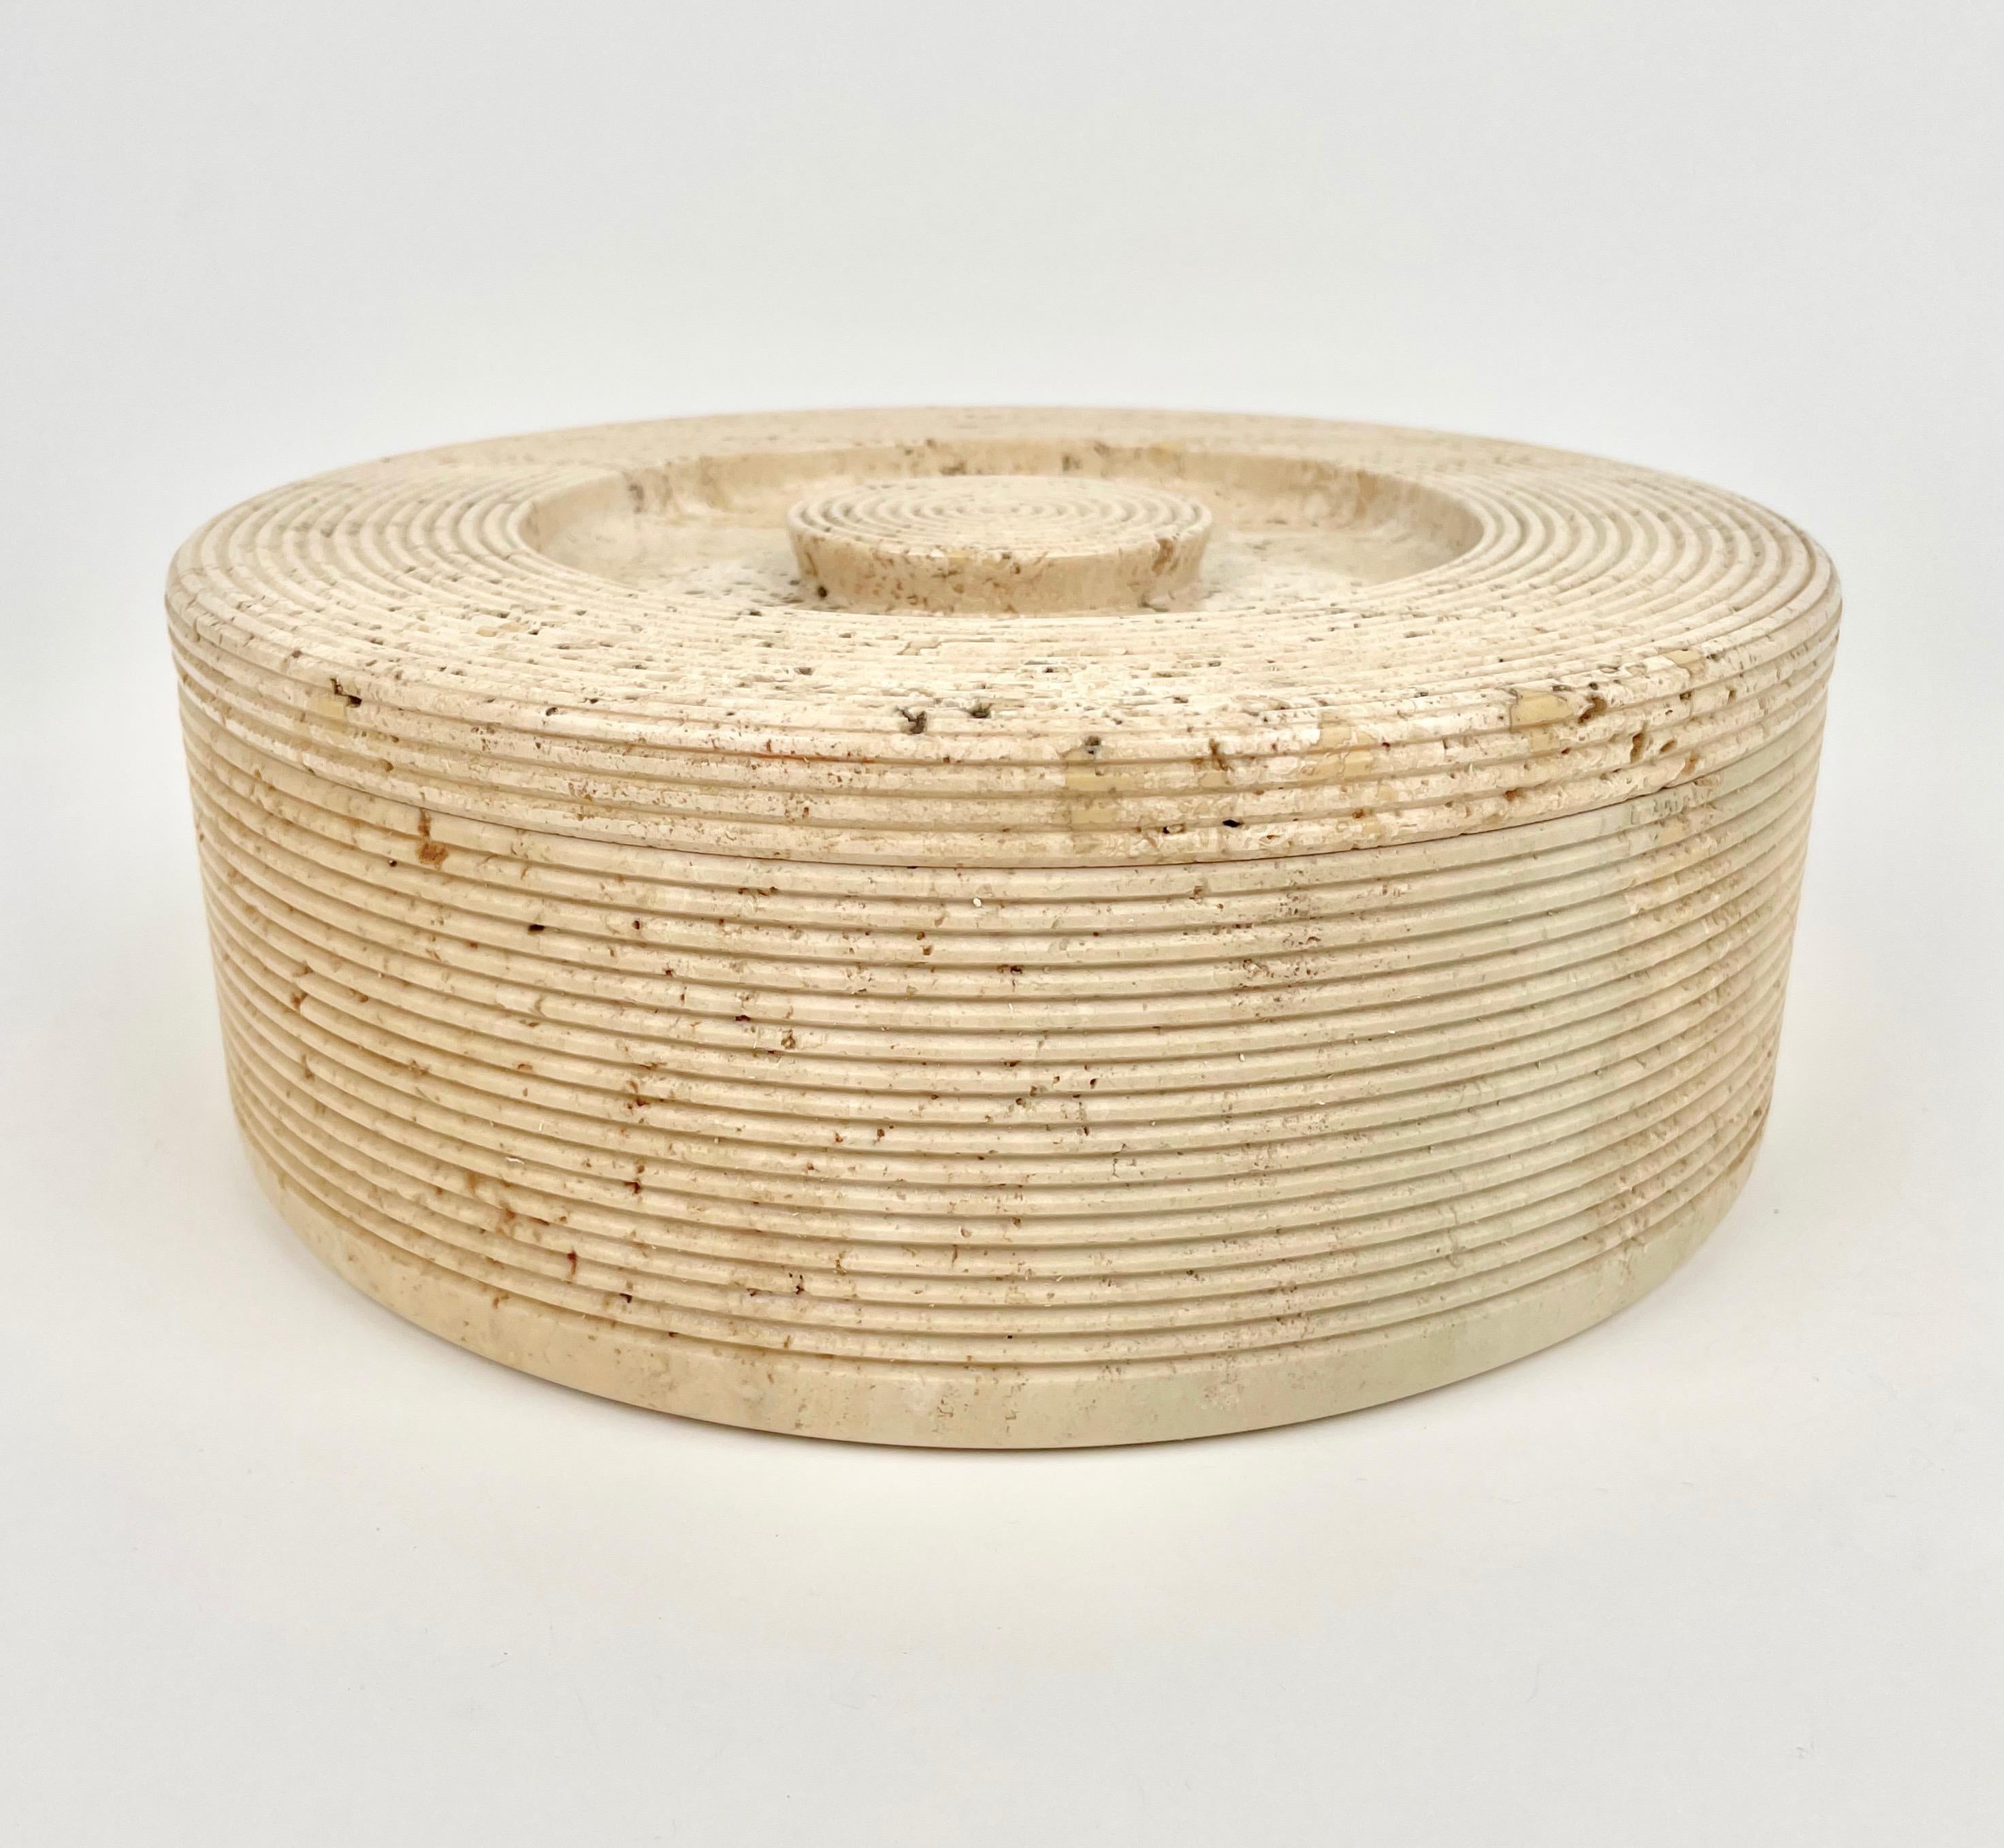 Round box in travertine marble by the Italian designers Pier Alessandro Giusti and Egidio Di Rosa for Up & Up. Made in Italy in the 1970s.

The box weights 5.6 kg.